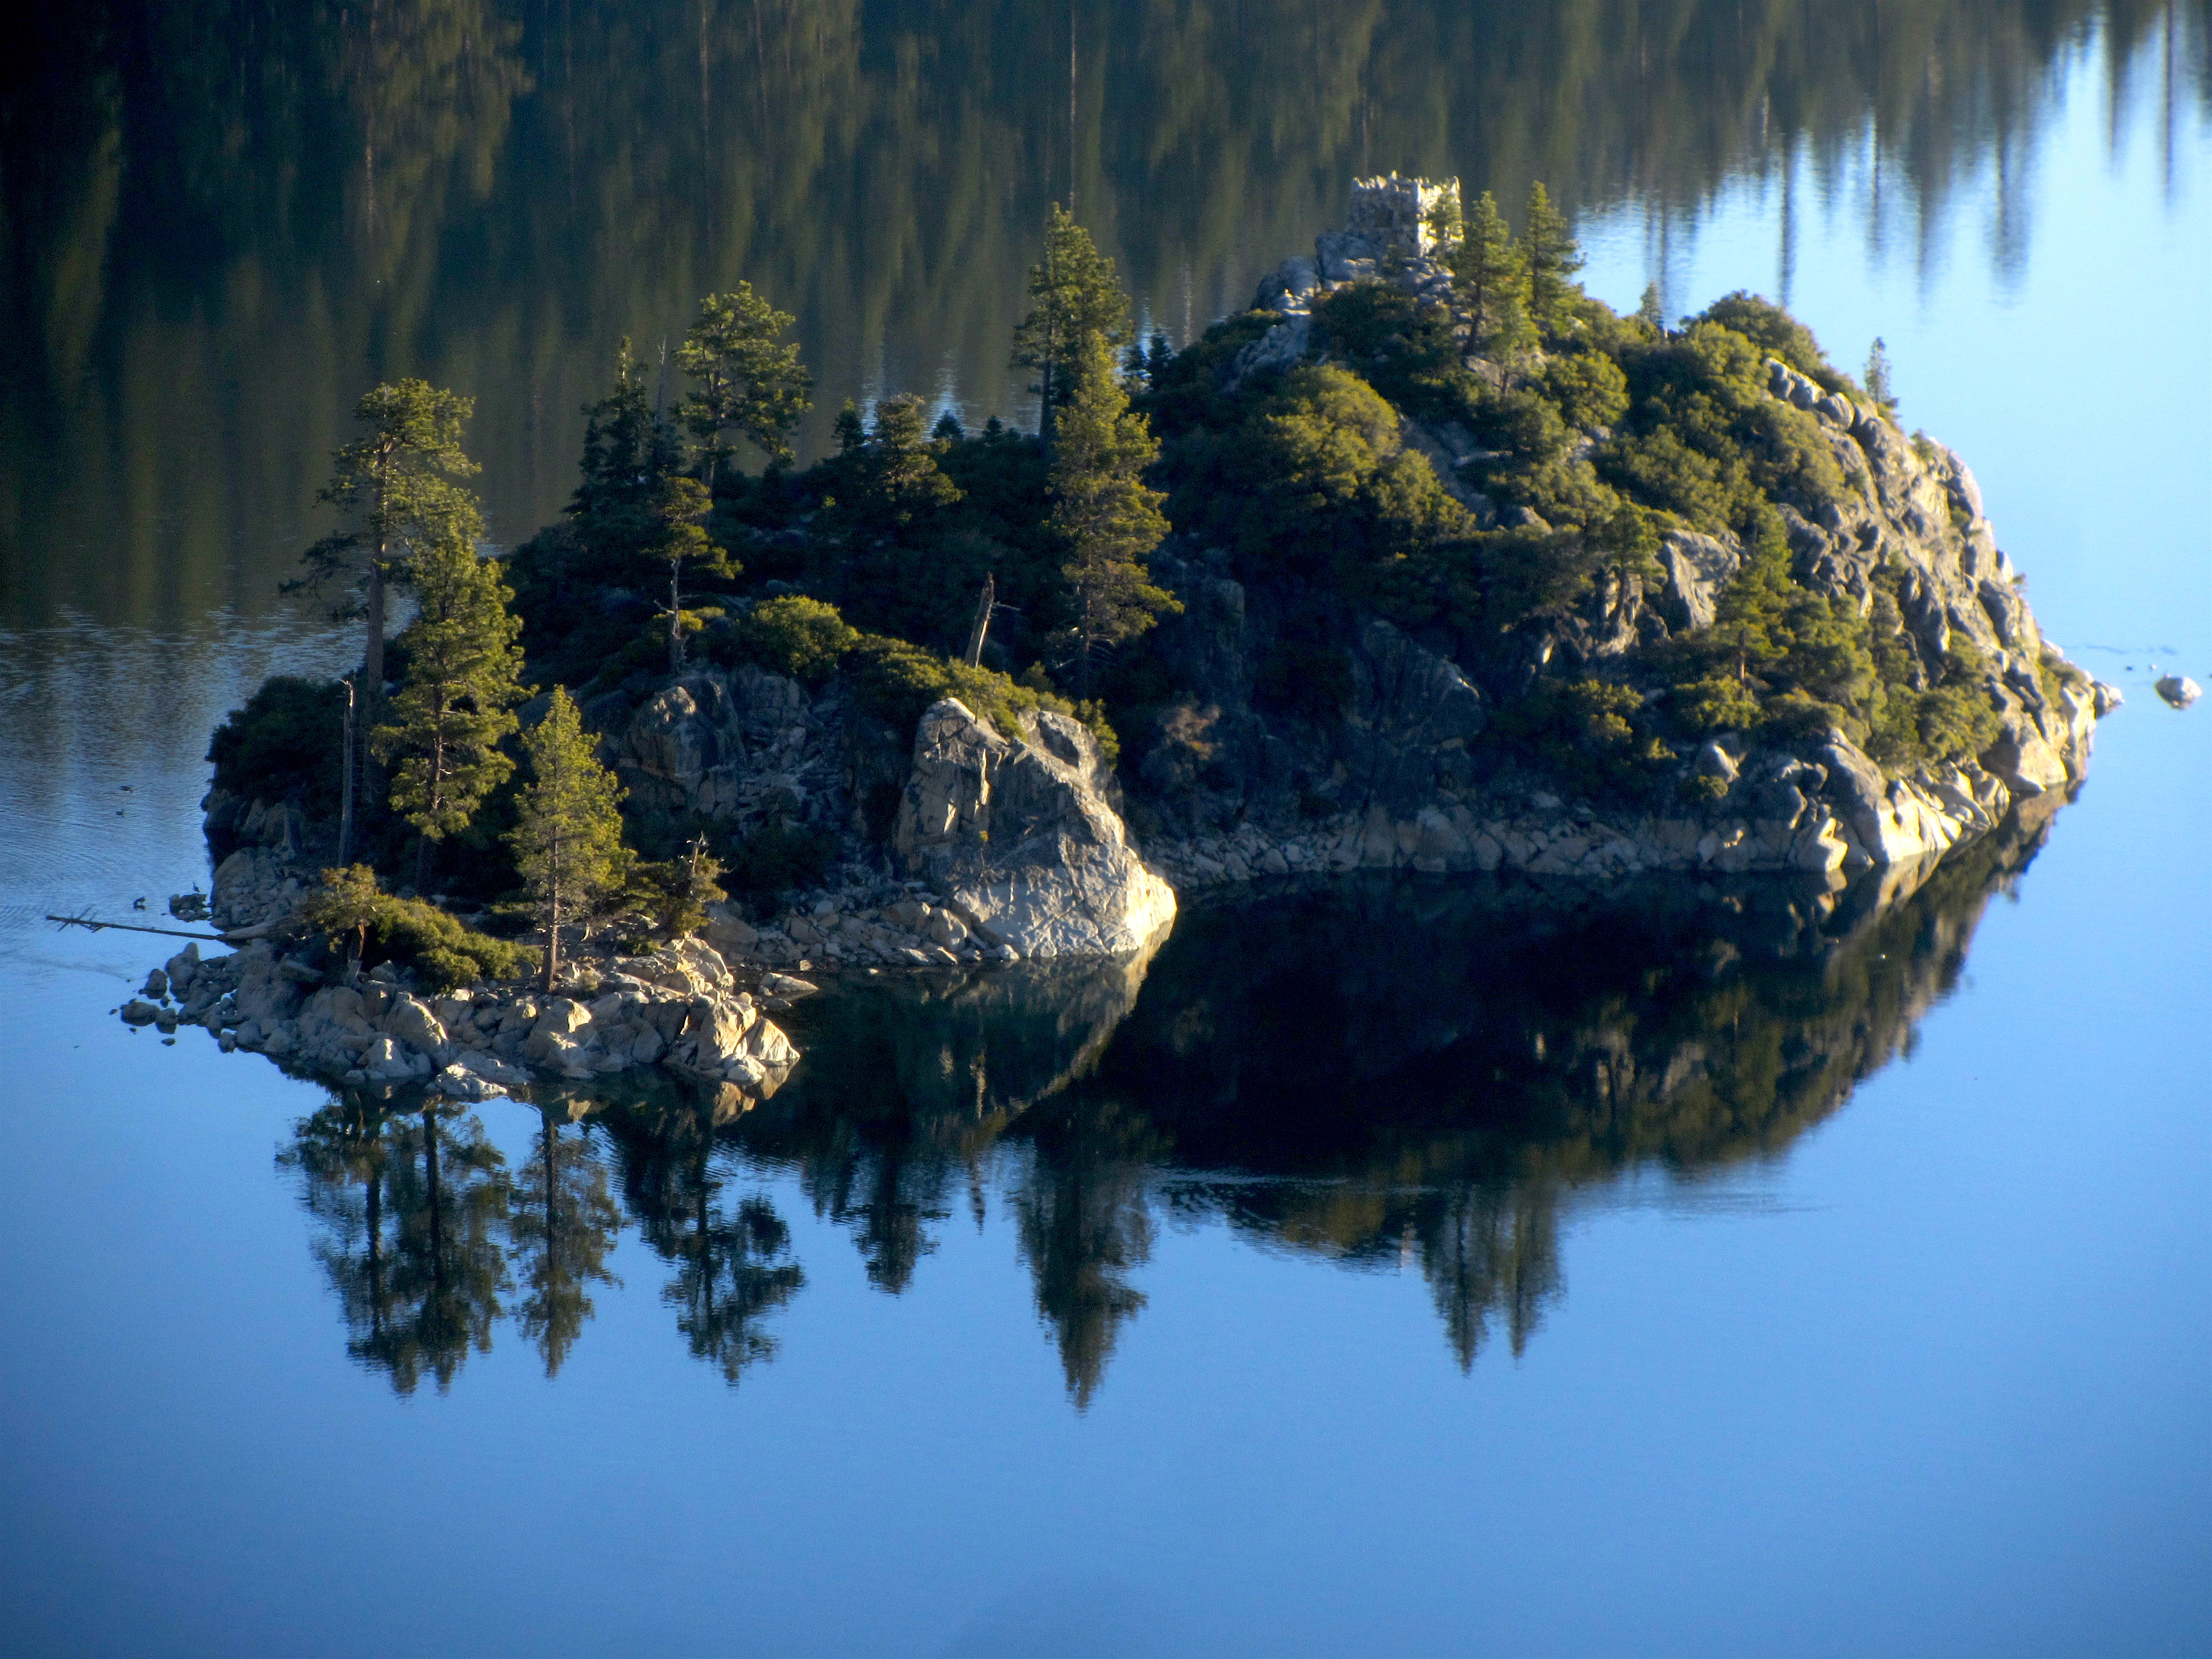 Fannette Island, Lake Tahoe's only Isle. Today. photo: miles clark/snowbrains